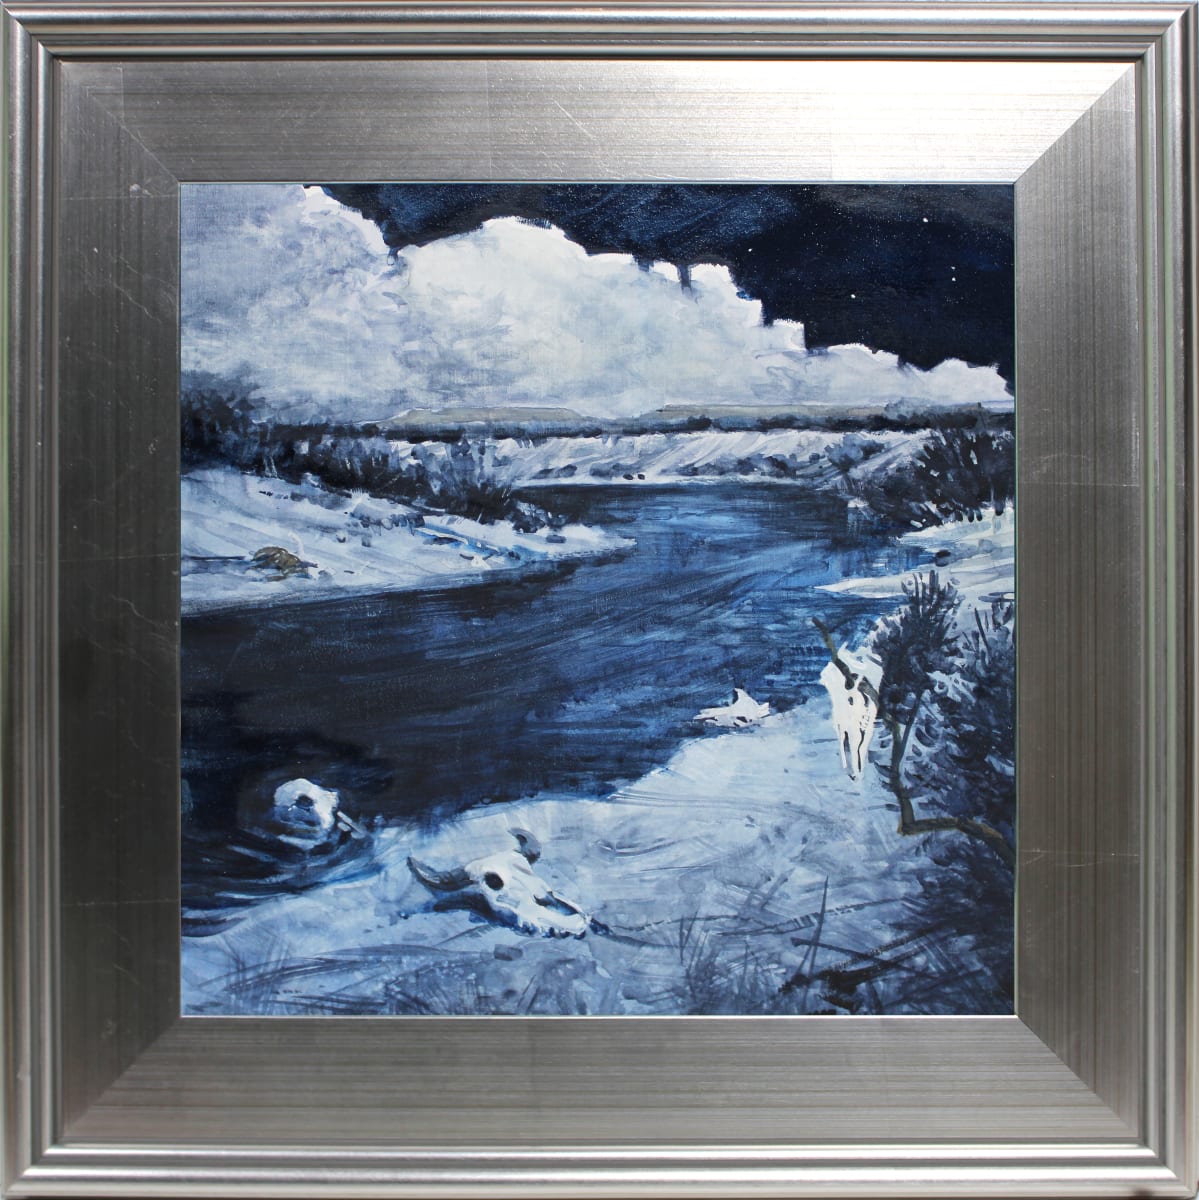 Nocturne At Horsehead Crossing by Baron Wilson  Image: Framed oil painting of the famous crossing on the Rio Pecos with Castle Gap visible in the distance.